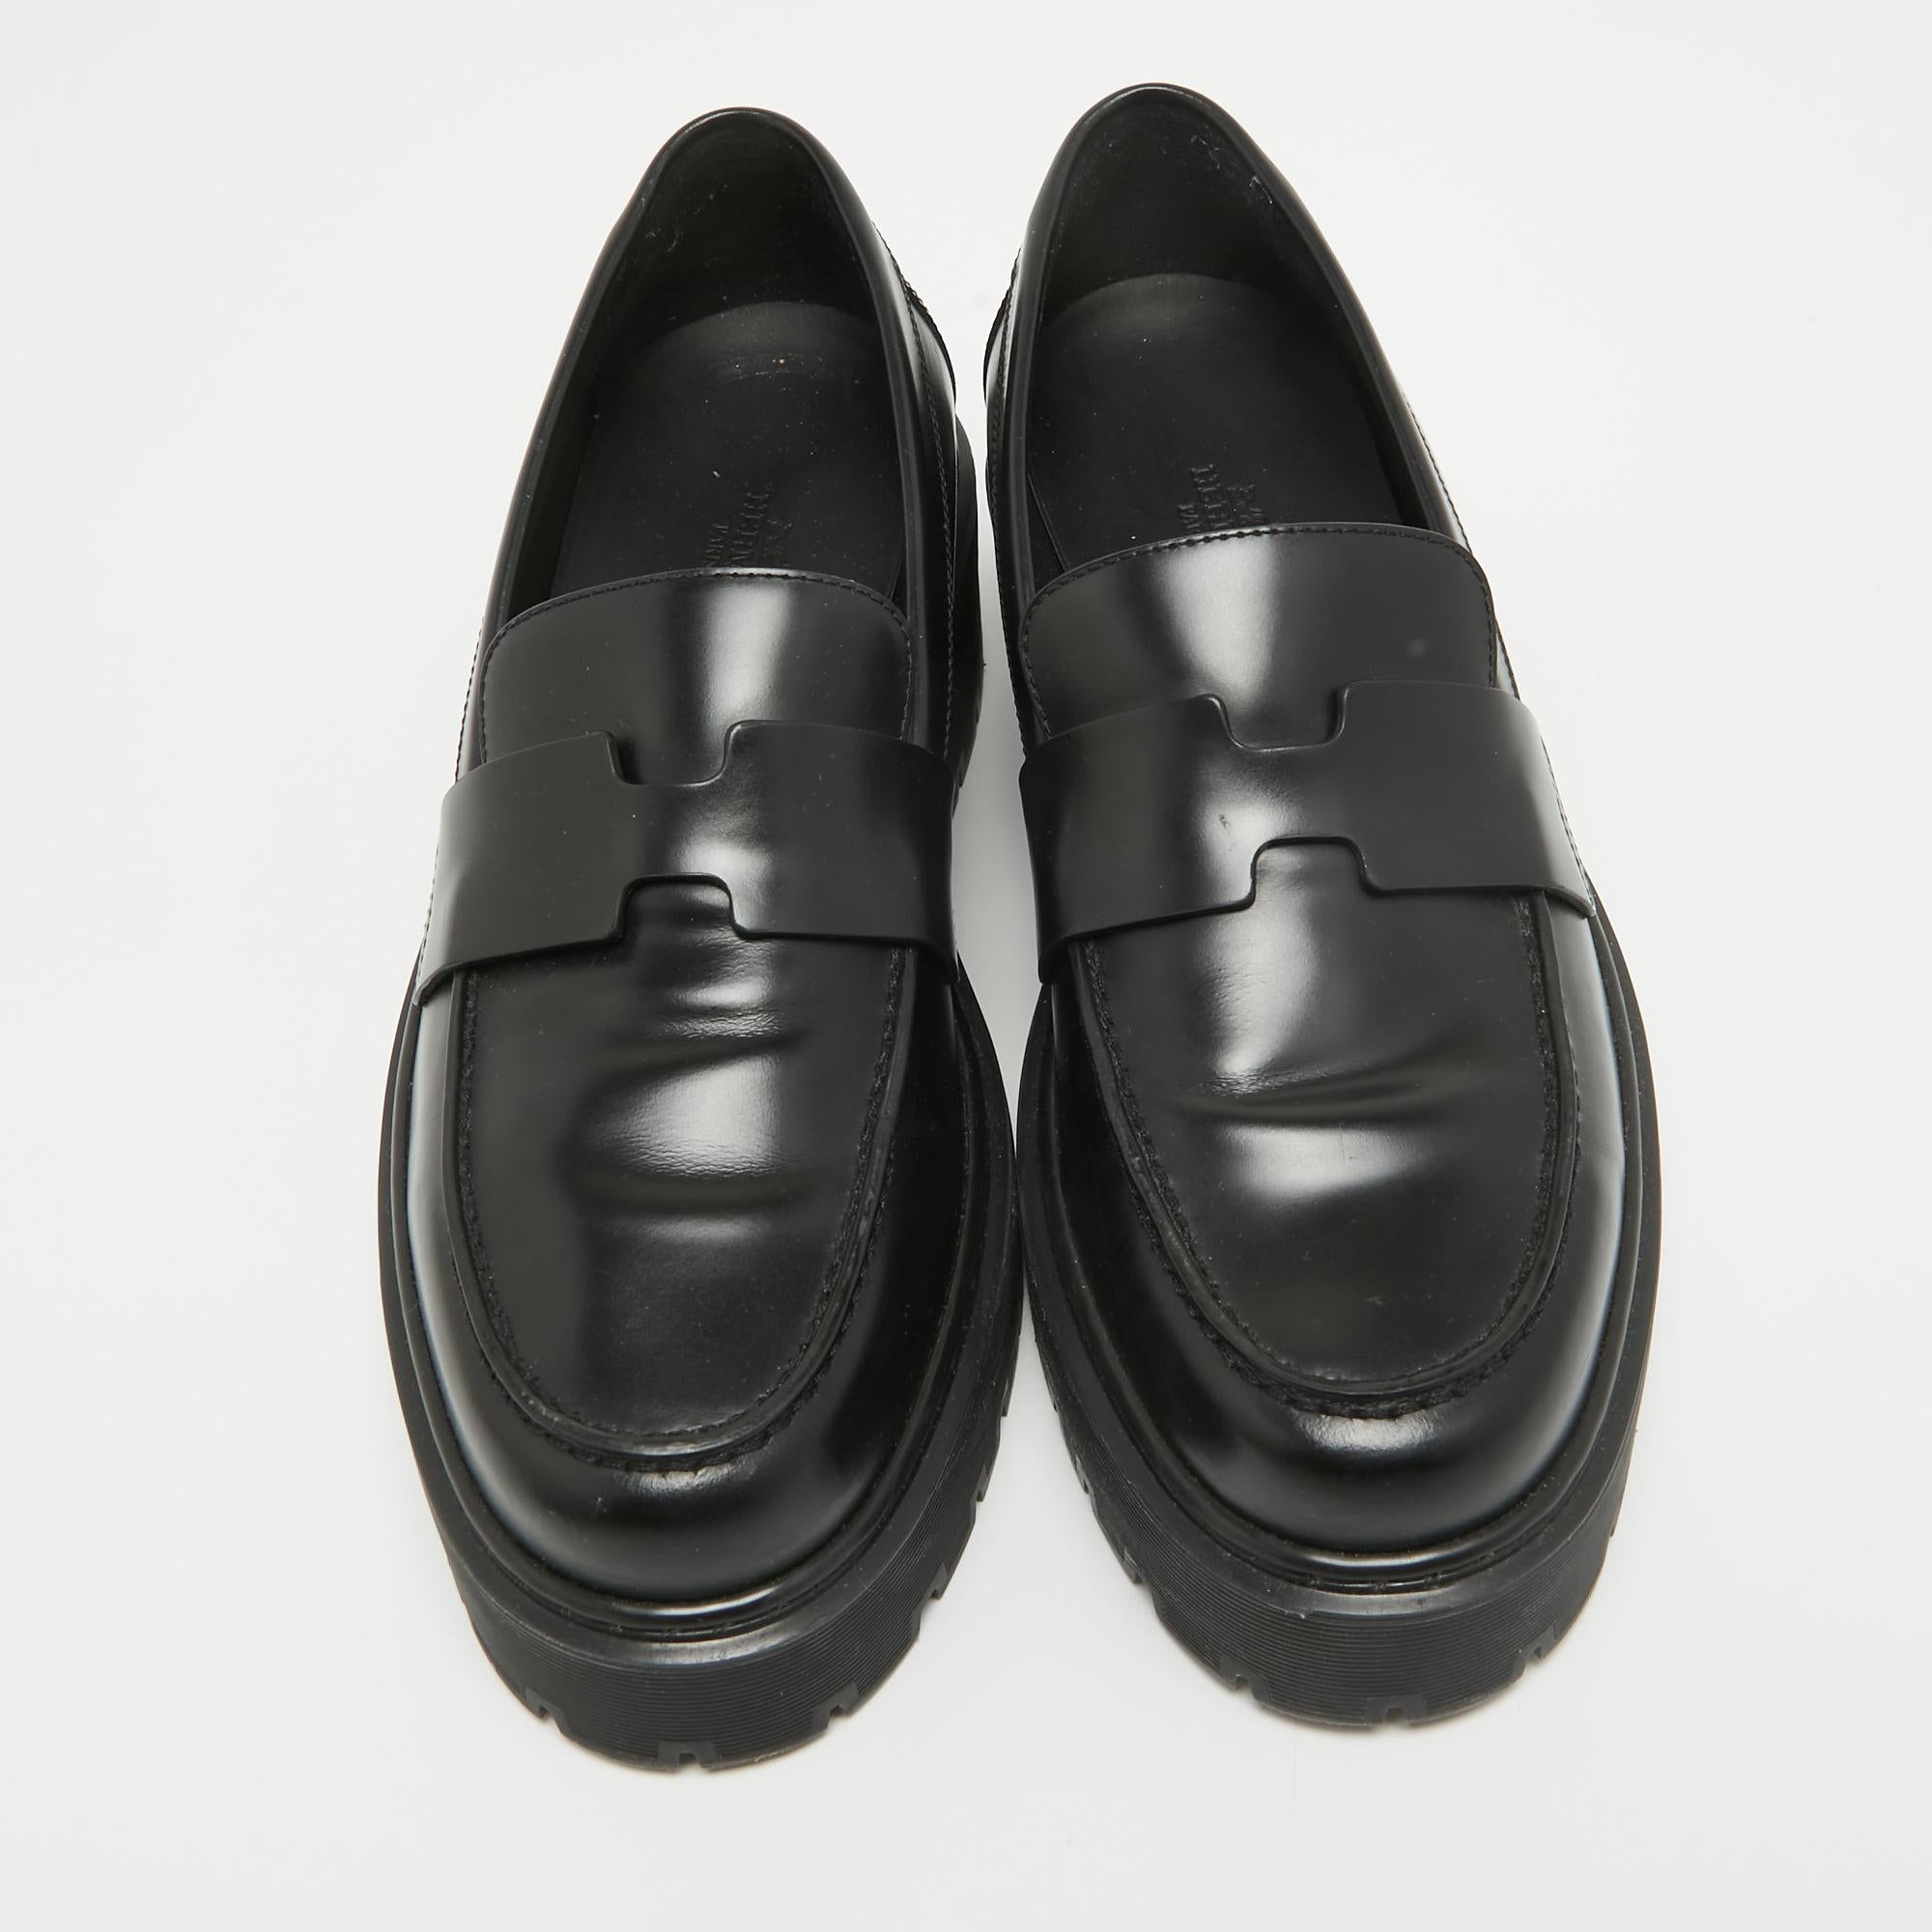 Let this comfortable pair be your first choice when you're out for a long day. These Hermes loafers have well-sewn uppers beautifully set on durable soles.

Includes: Original Dustbag, Original Box

